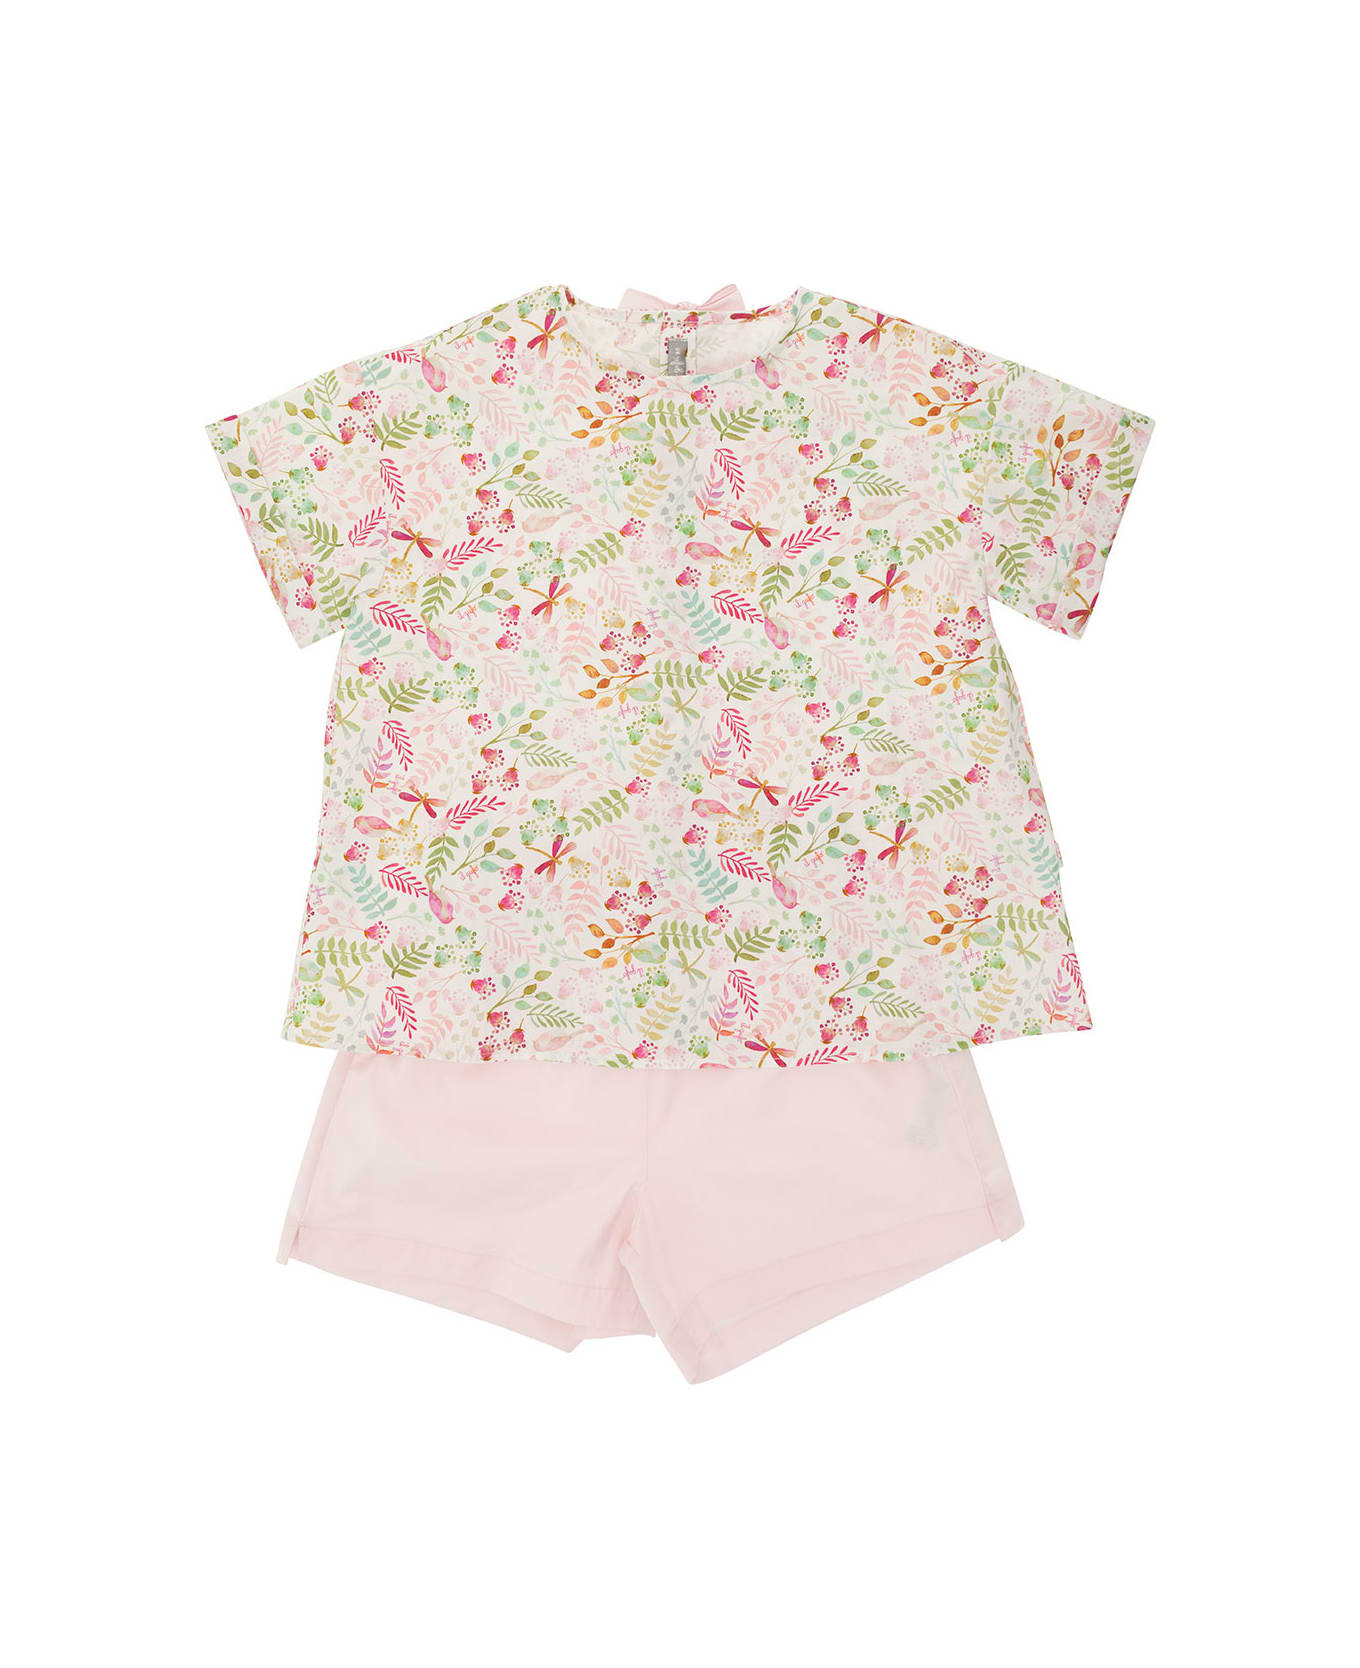 Il Gufo Pink T-shirt And Shorts With Flower Print And Bow Detail In Cotton Girl - Pink ジャンプスーツ